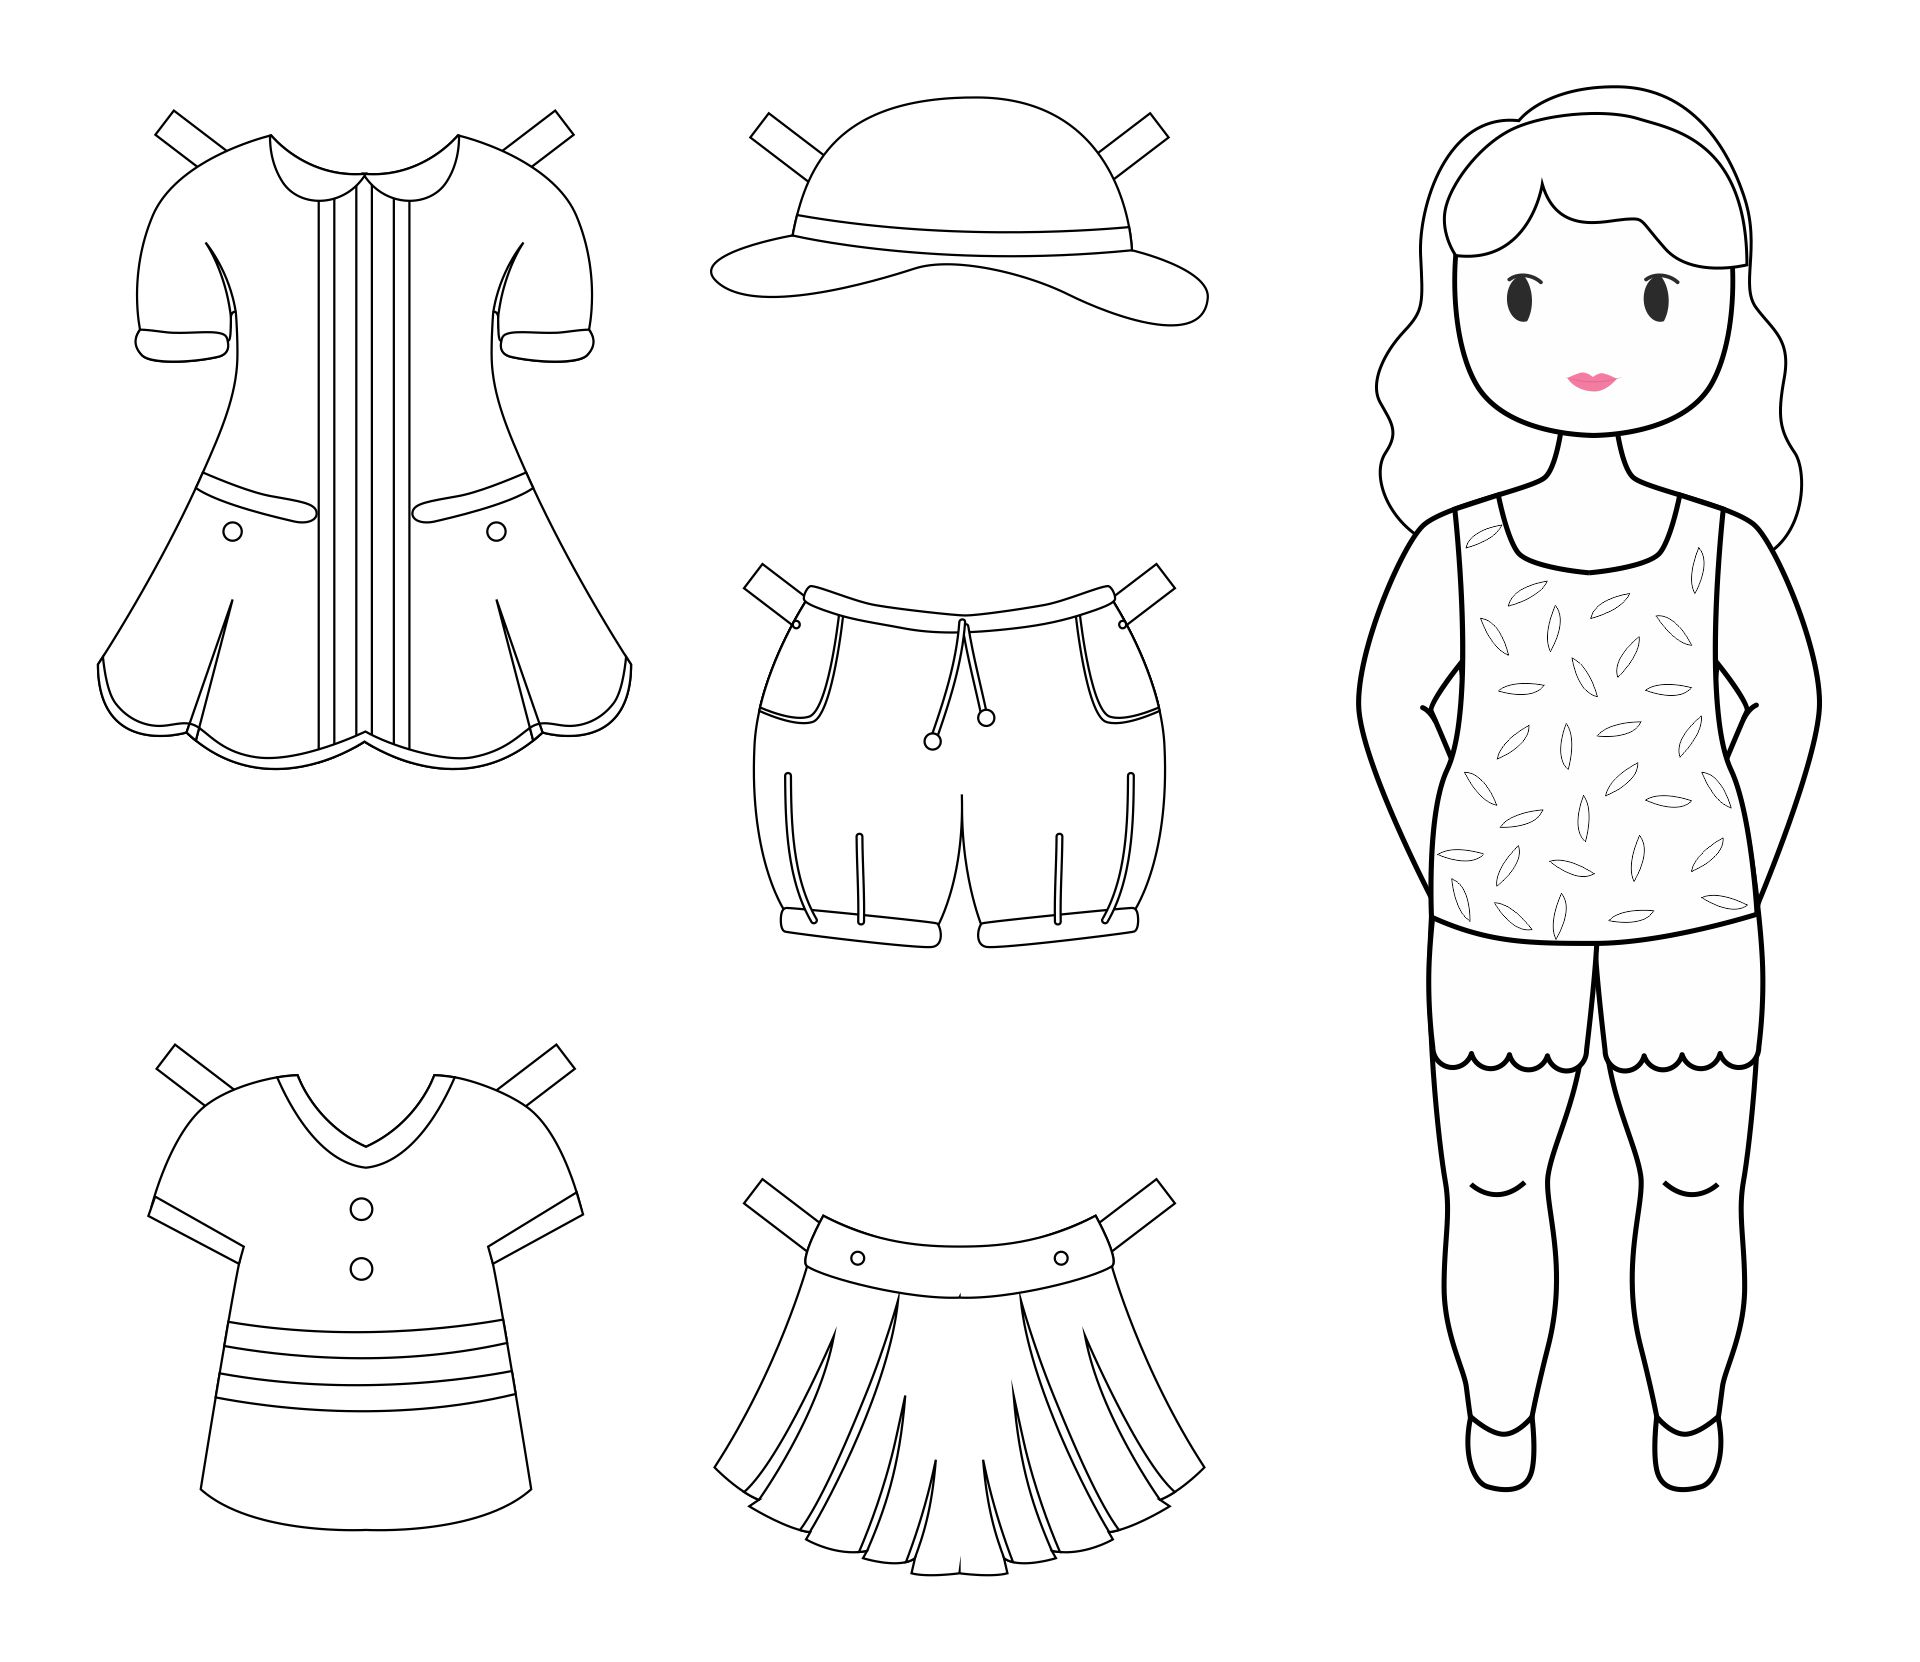 9-best-images-of-printable-paper-dolls-to-color-coloring-paper-dolls